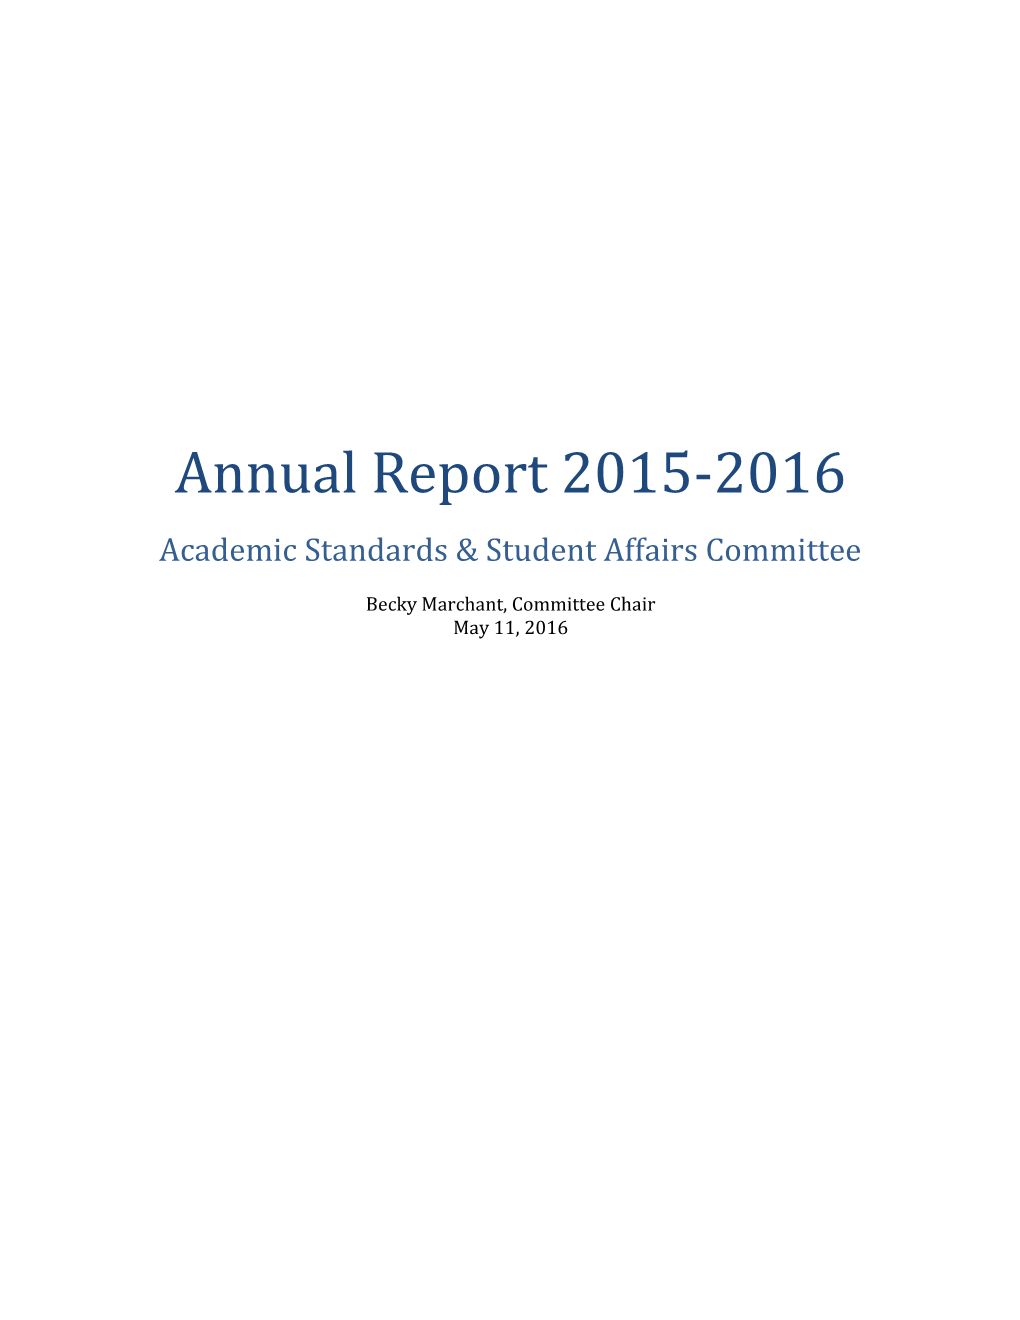 ASSA Committee Annual Report 2015-2016